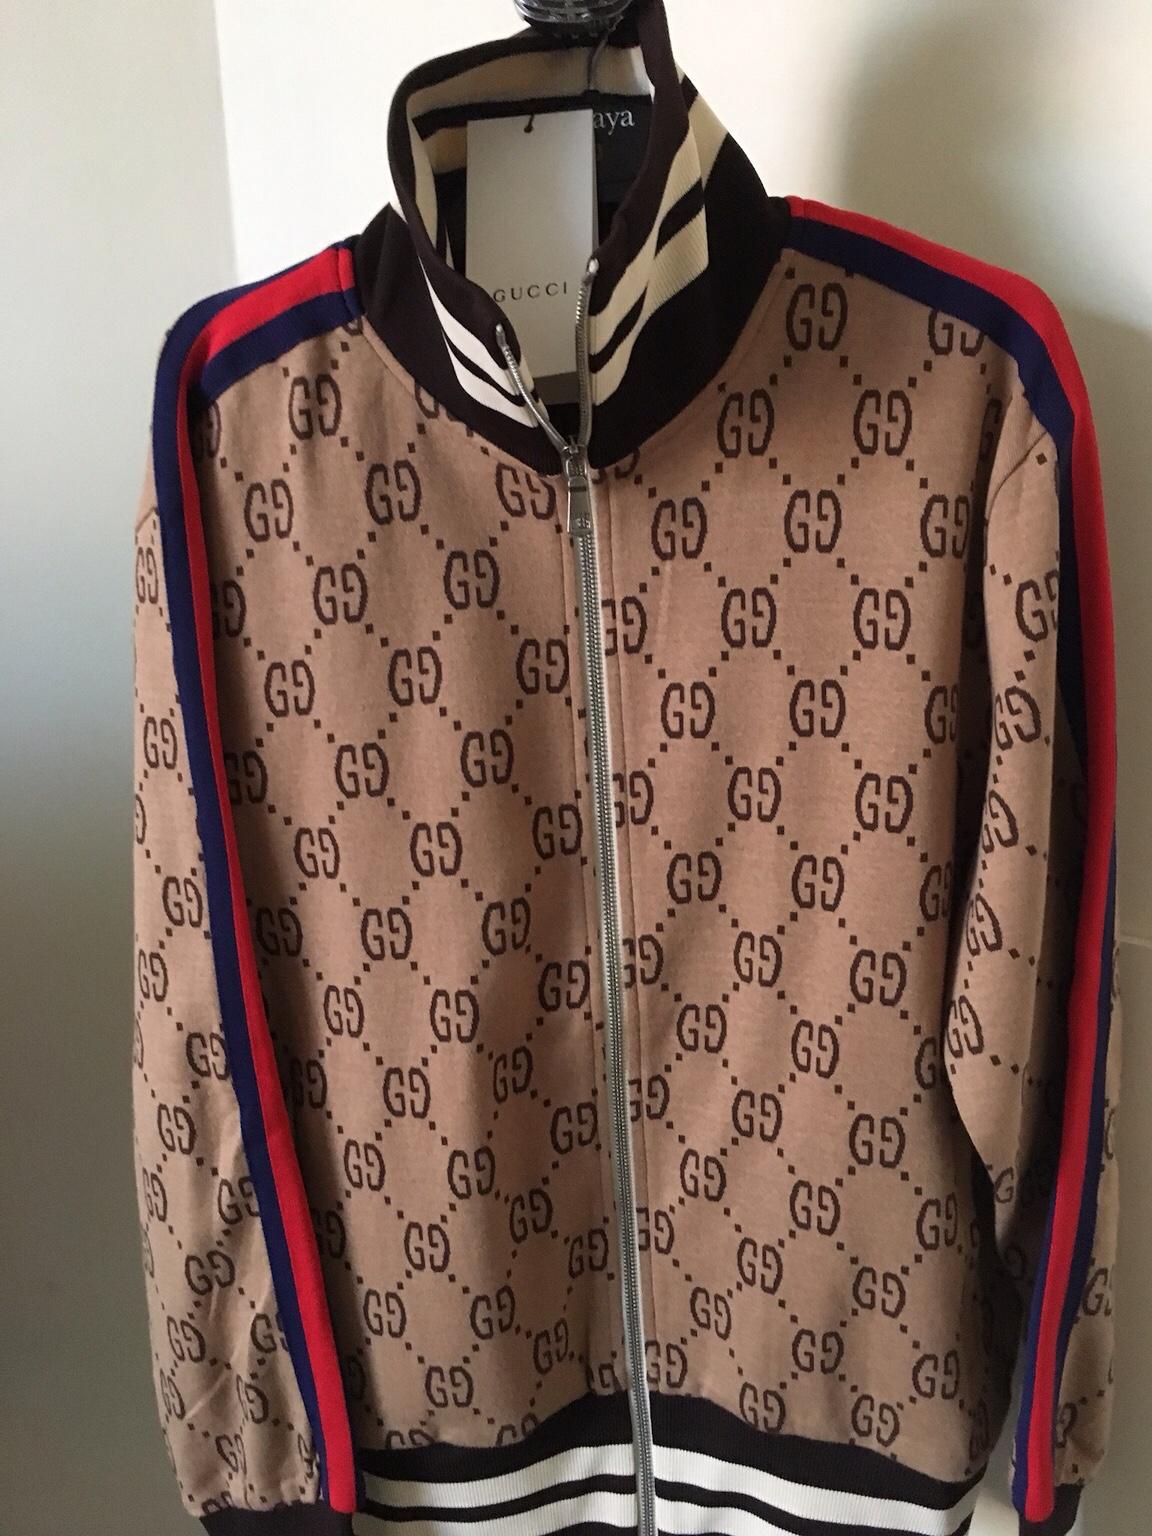 Authentic Gucci jacket UNISEX in M15 Manchester for £150.00 for sale | Shpock